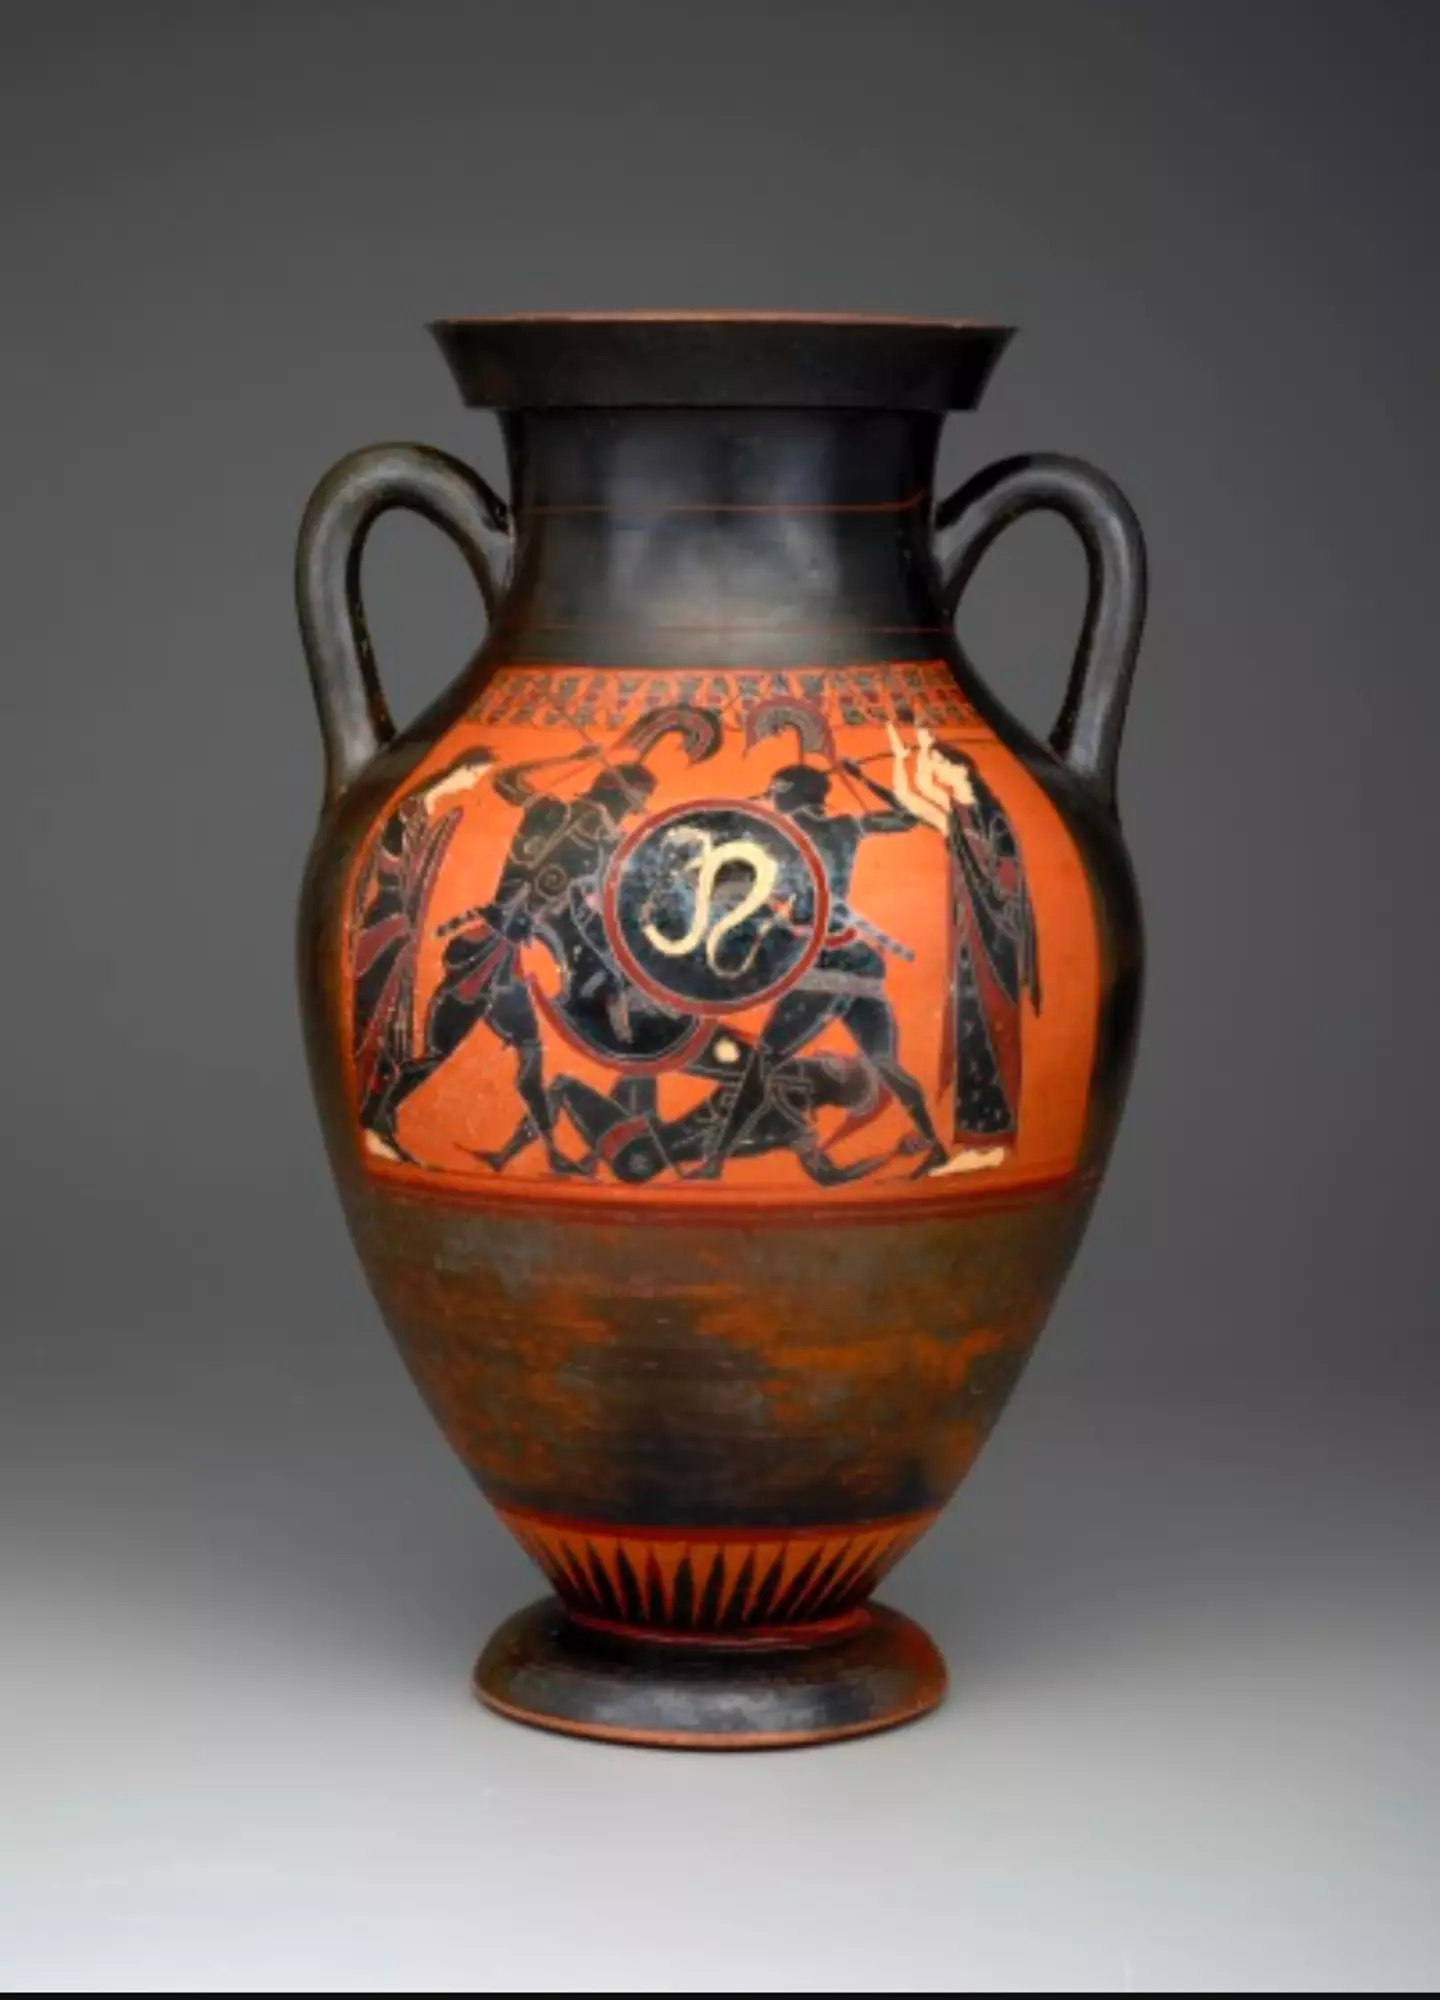 Black-figure panel amphora from the 6th century BC